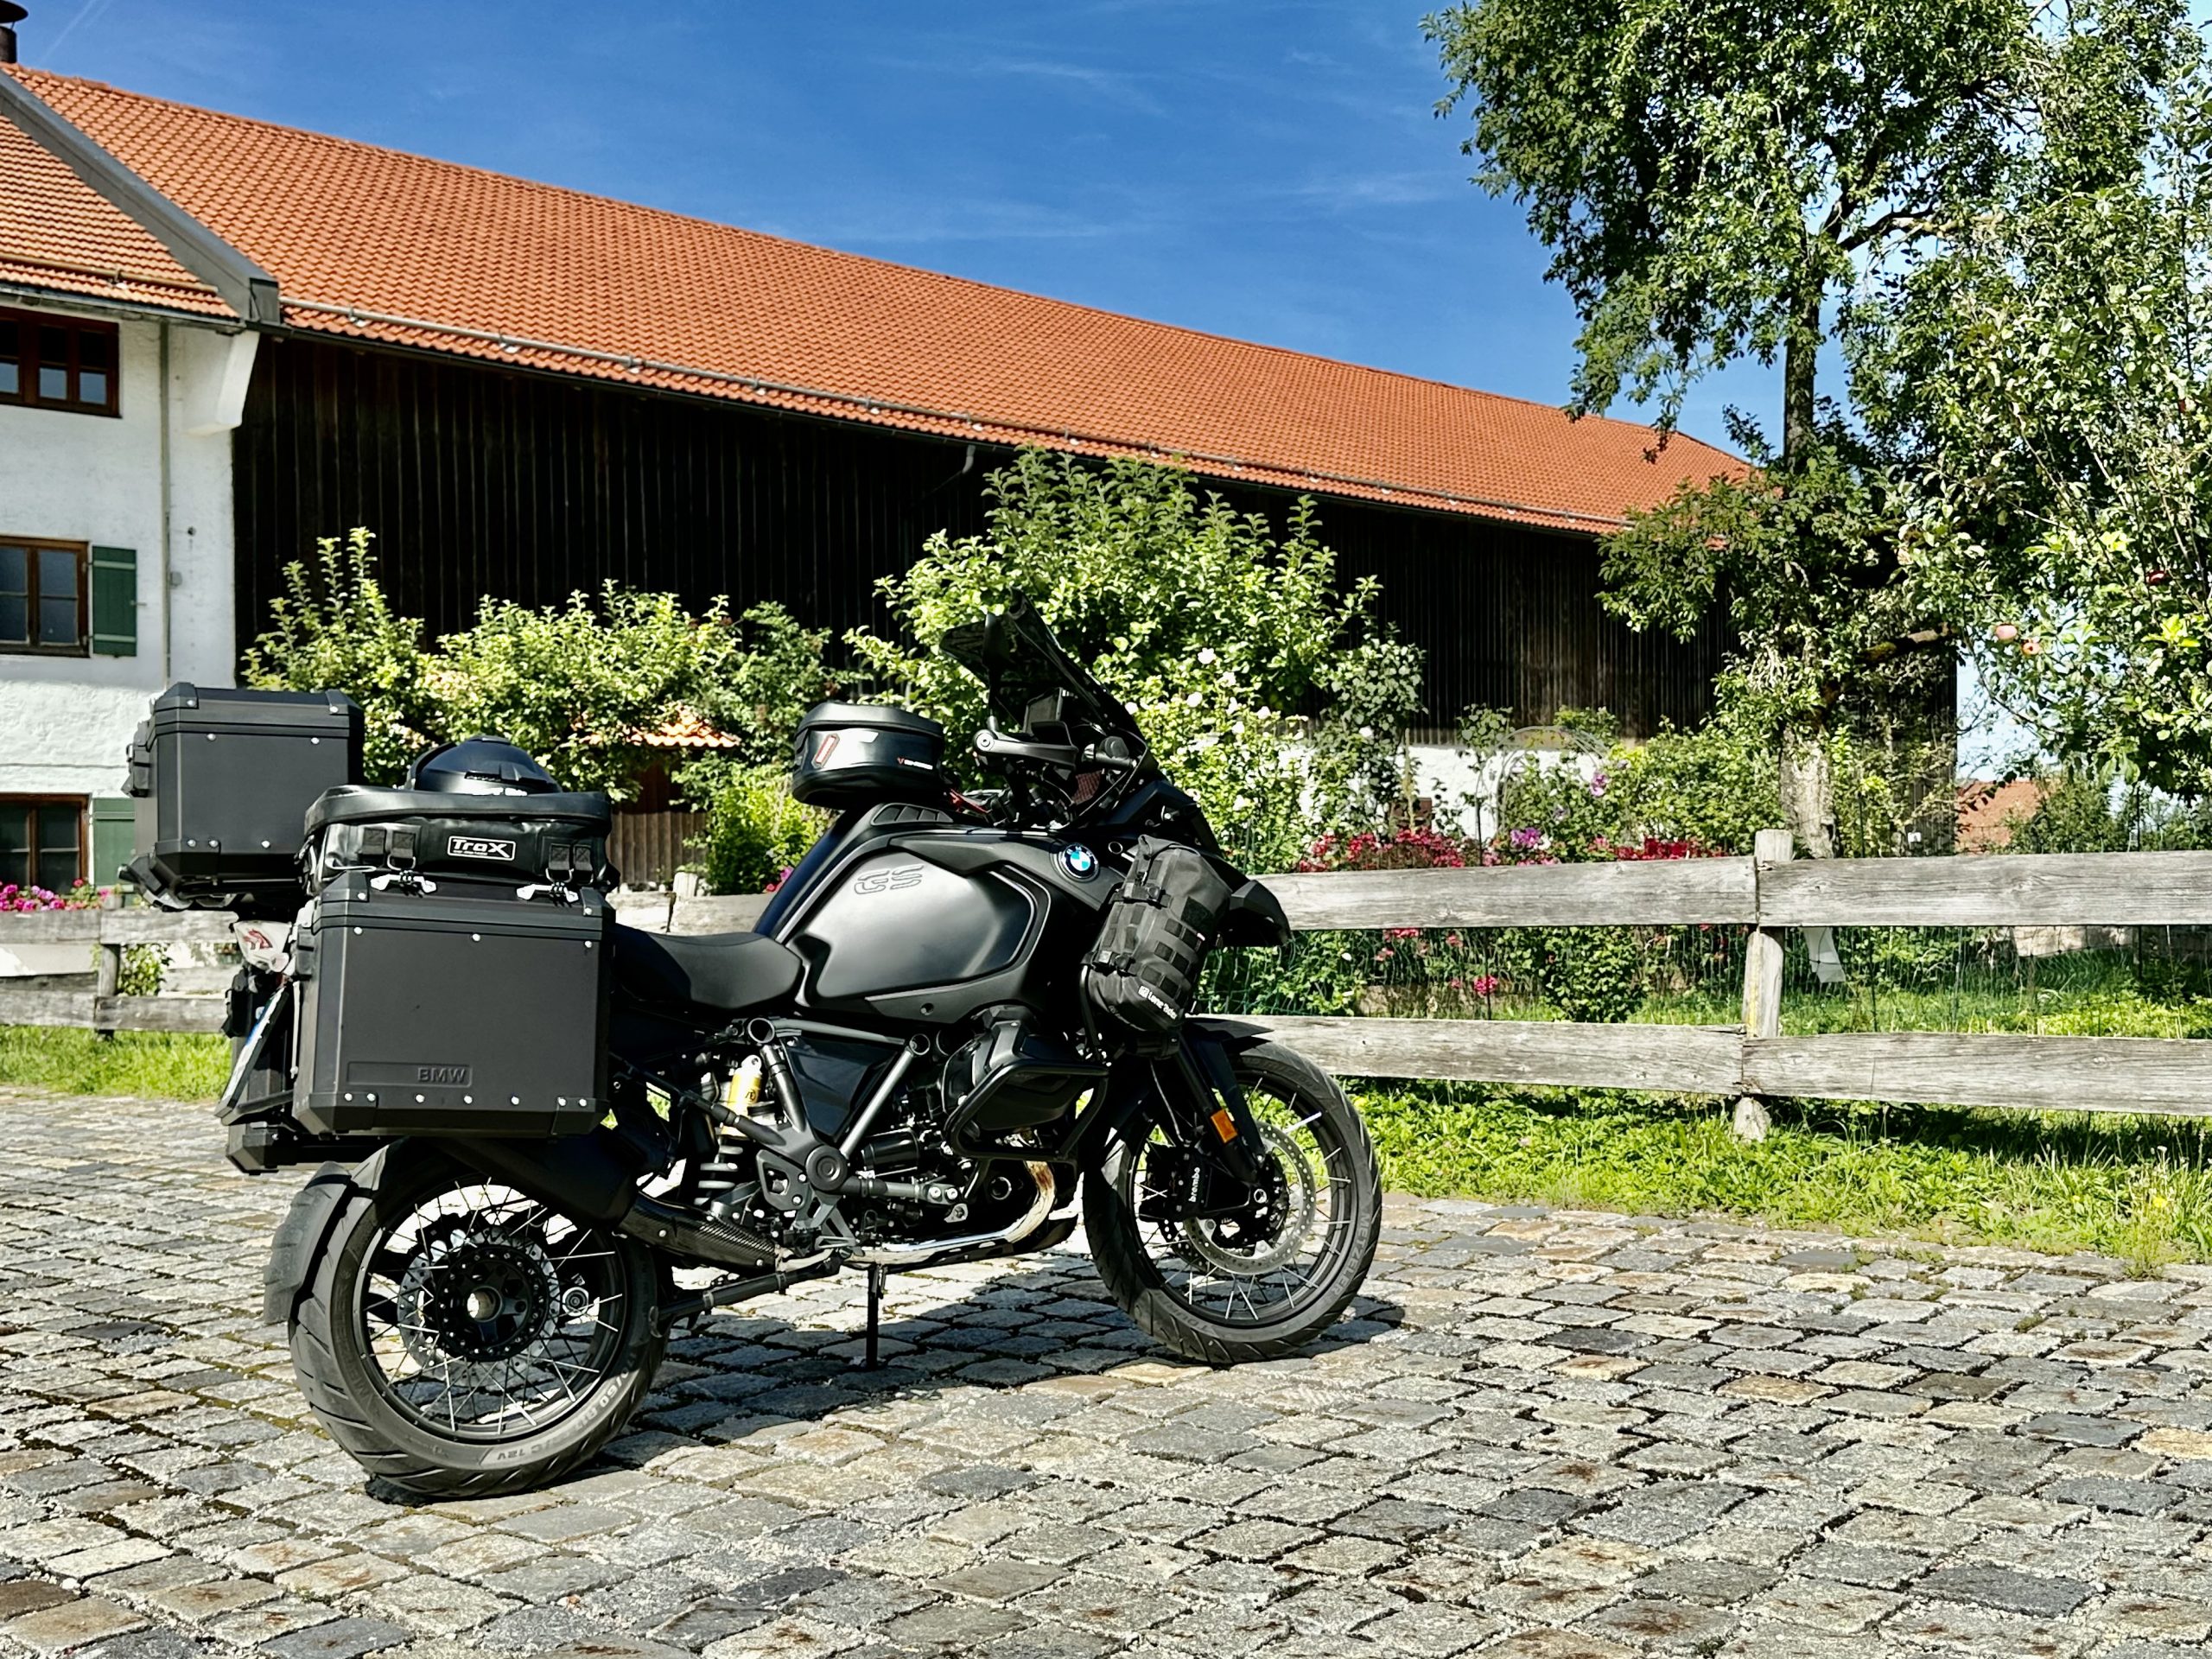 The first 1.000 km on the GSA